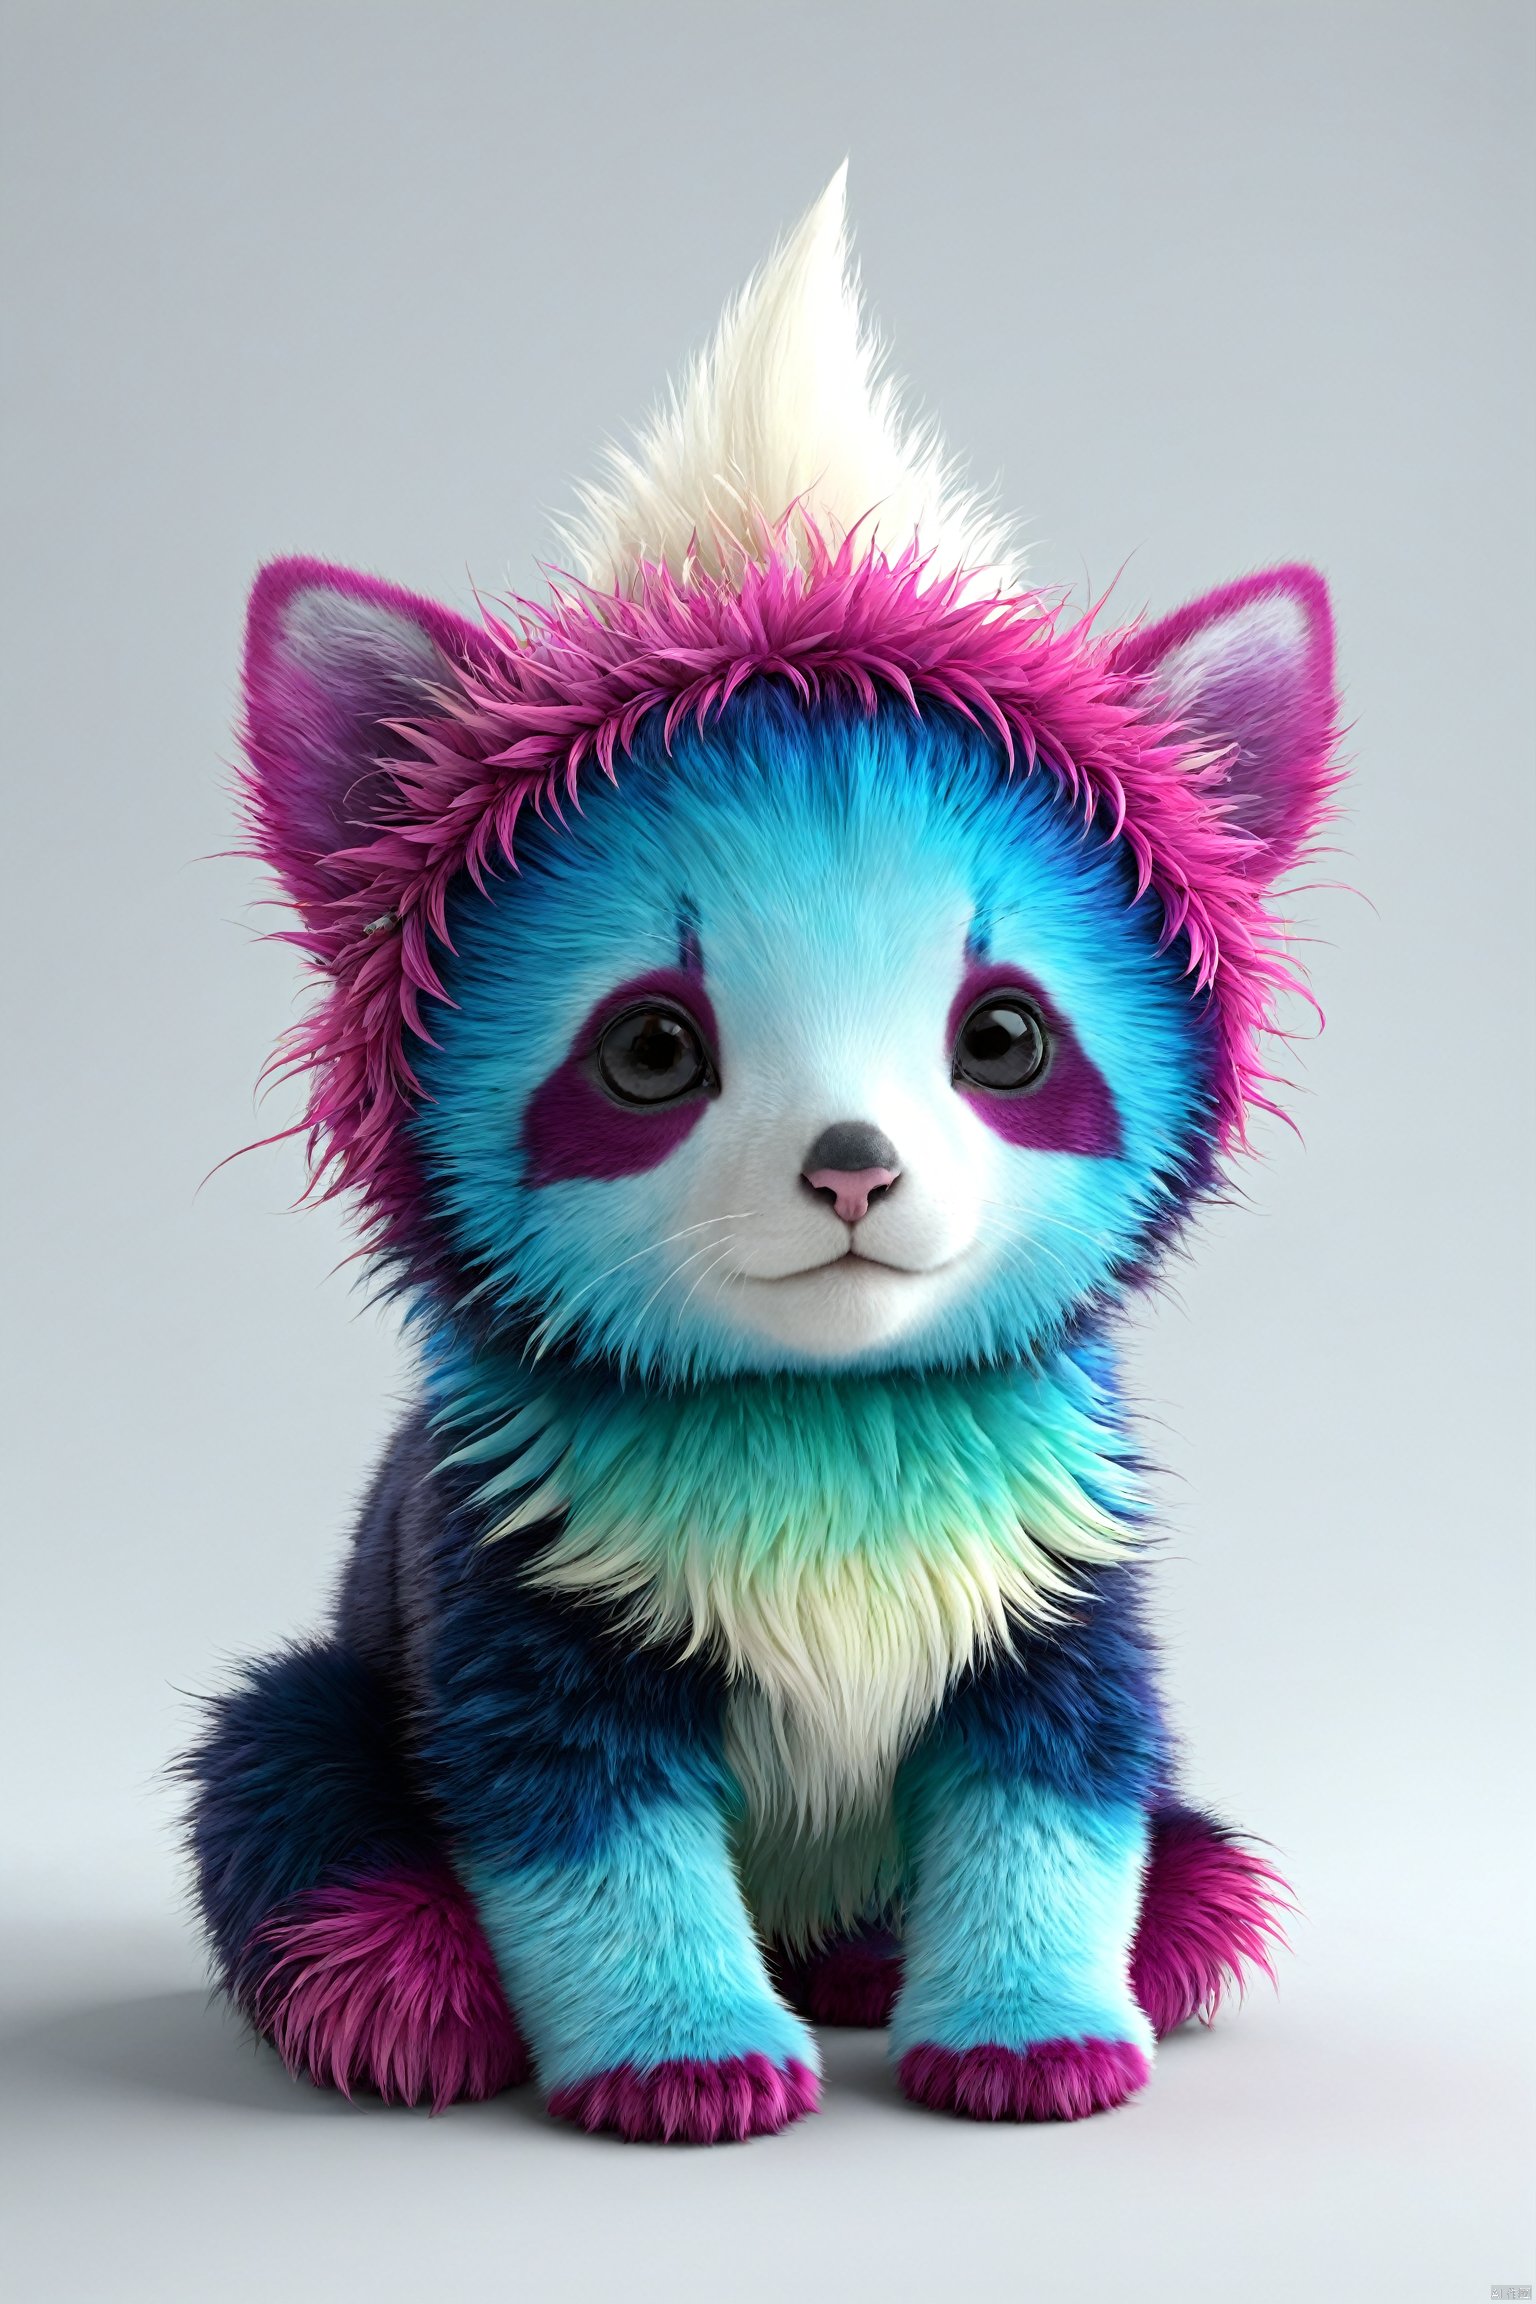  CUTE AND ADORABLE CUDDLY cute colorful creature FANTASY, DREAMLIKE, SURREALISM, SUPER CUTE, TRENDING ON ARTSTATION